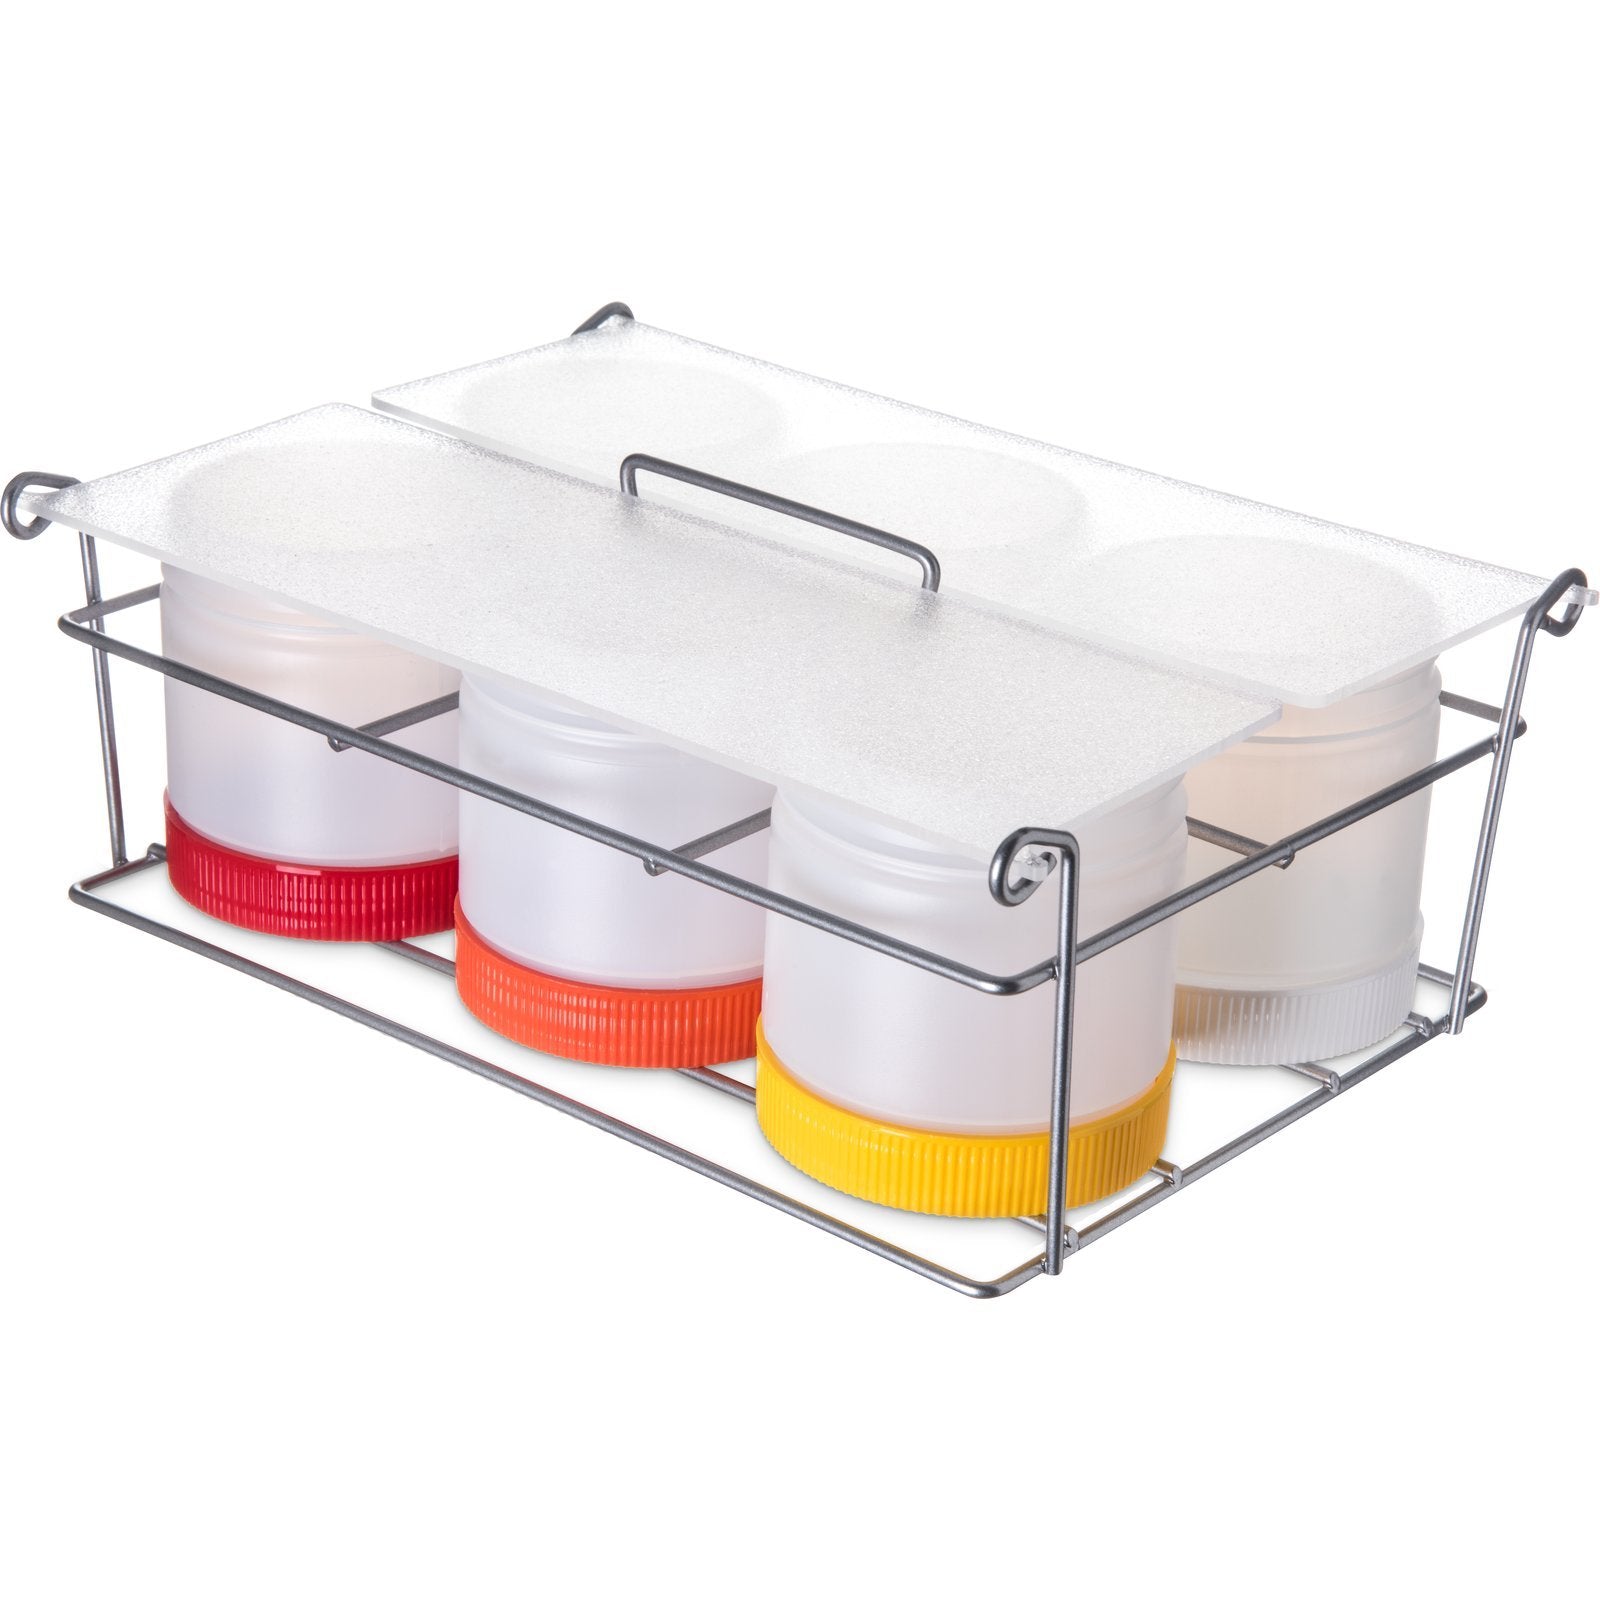 Store 'N Pour® Condiment Caddy, 12"L x 9"W x 4-3/4"H, (6) wide mouth with acrylic cover, polyethylene, clear - Mabrook Hotel Supplies